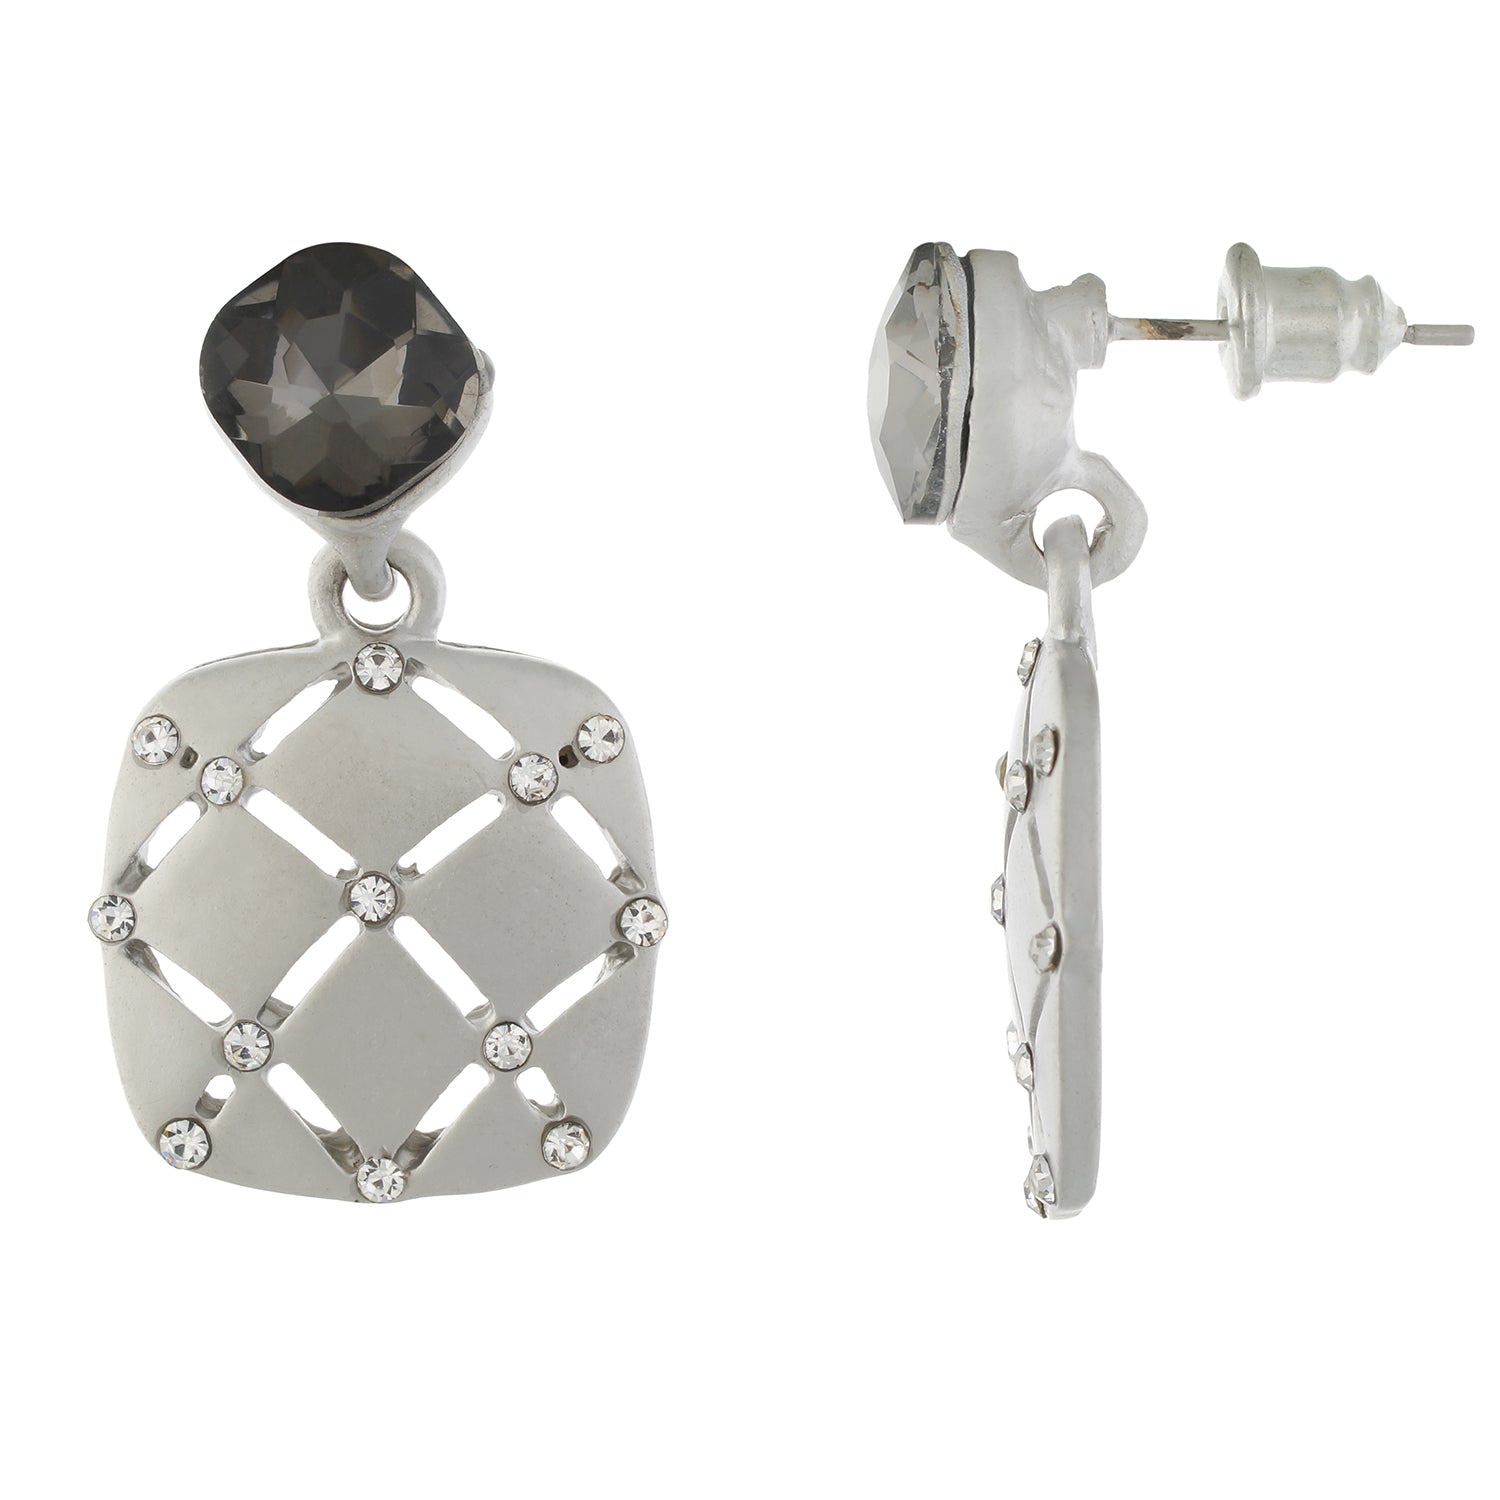 Silver colour Geometrical Design Hanging Earrings for Girls and Women